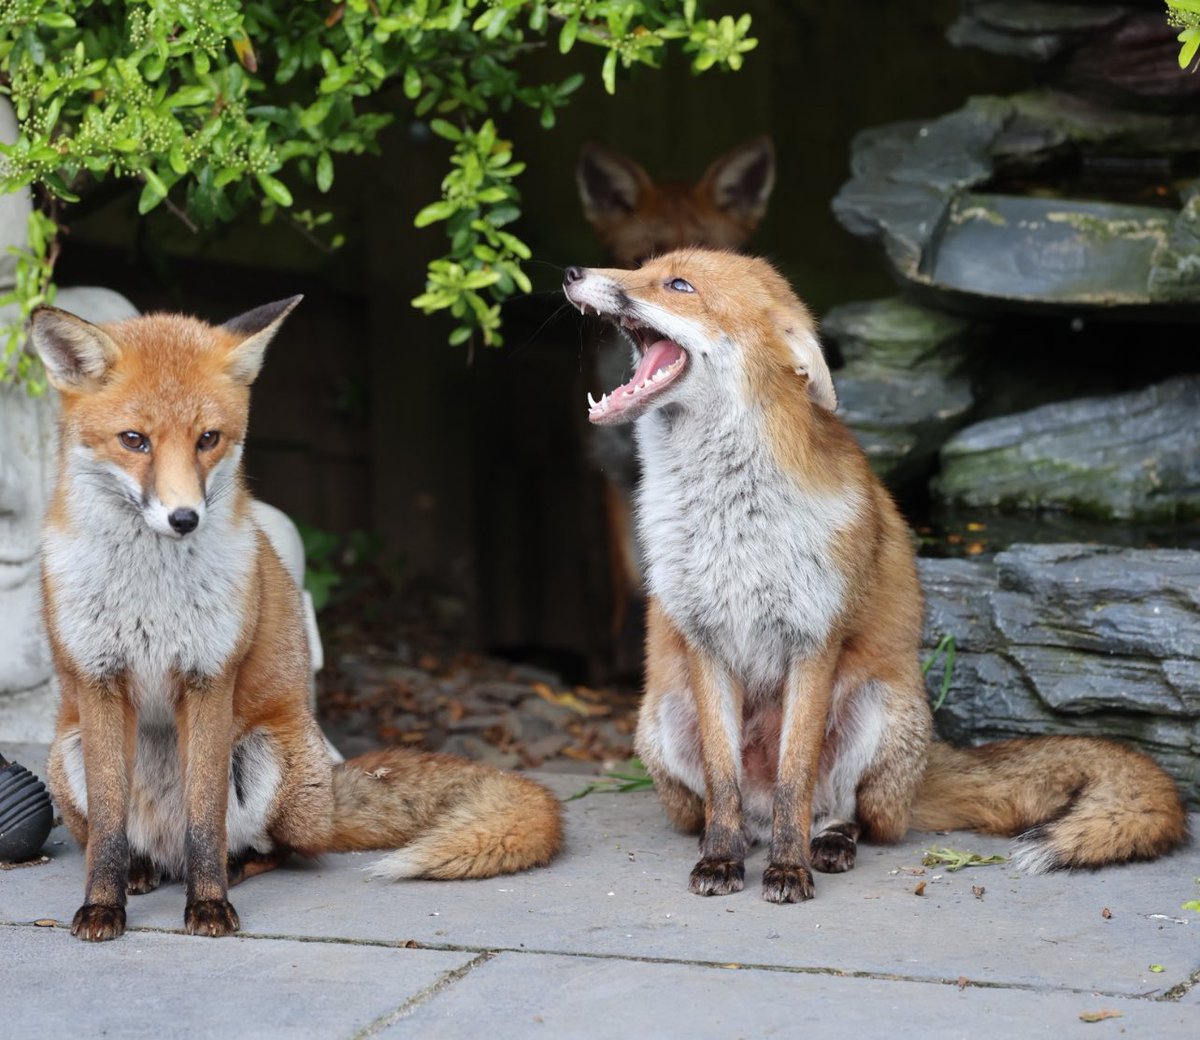 Which one is female? Look closely, the one on the right is clearly nursing cubs. #Fox #Foxes #foxcub #foxlovers #foxinmygarden #foxkit #FoxOfTheDay #foxlovers #funnyanimals #wildlifephotography #urbanfox #urbanwildlife #TwitterNatureCommunity #PhotoOfTheWeek